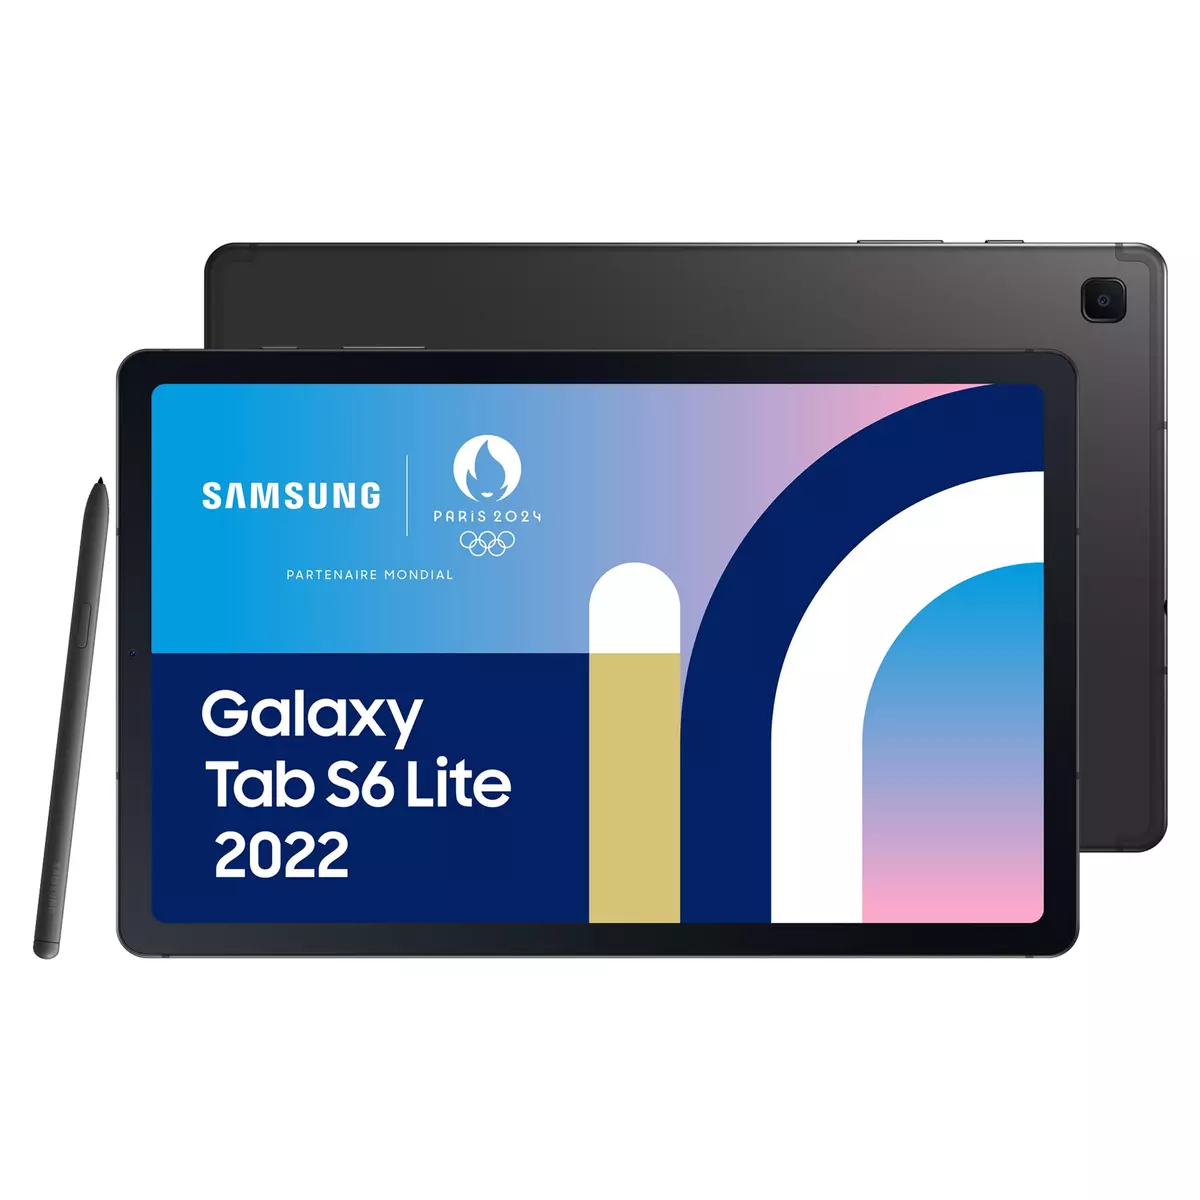 SAMSUNG Galaxy Tab S9 Wifi 128 Go Anthracite - Tablette tactile Pas Cher